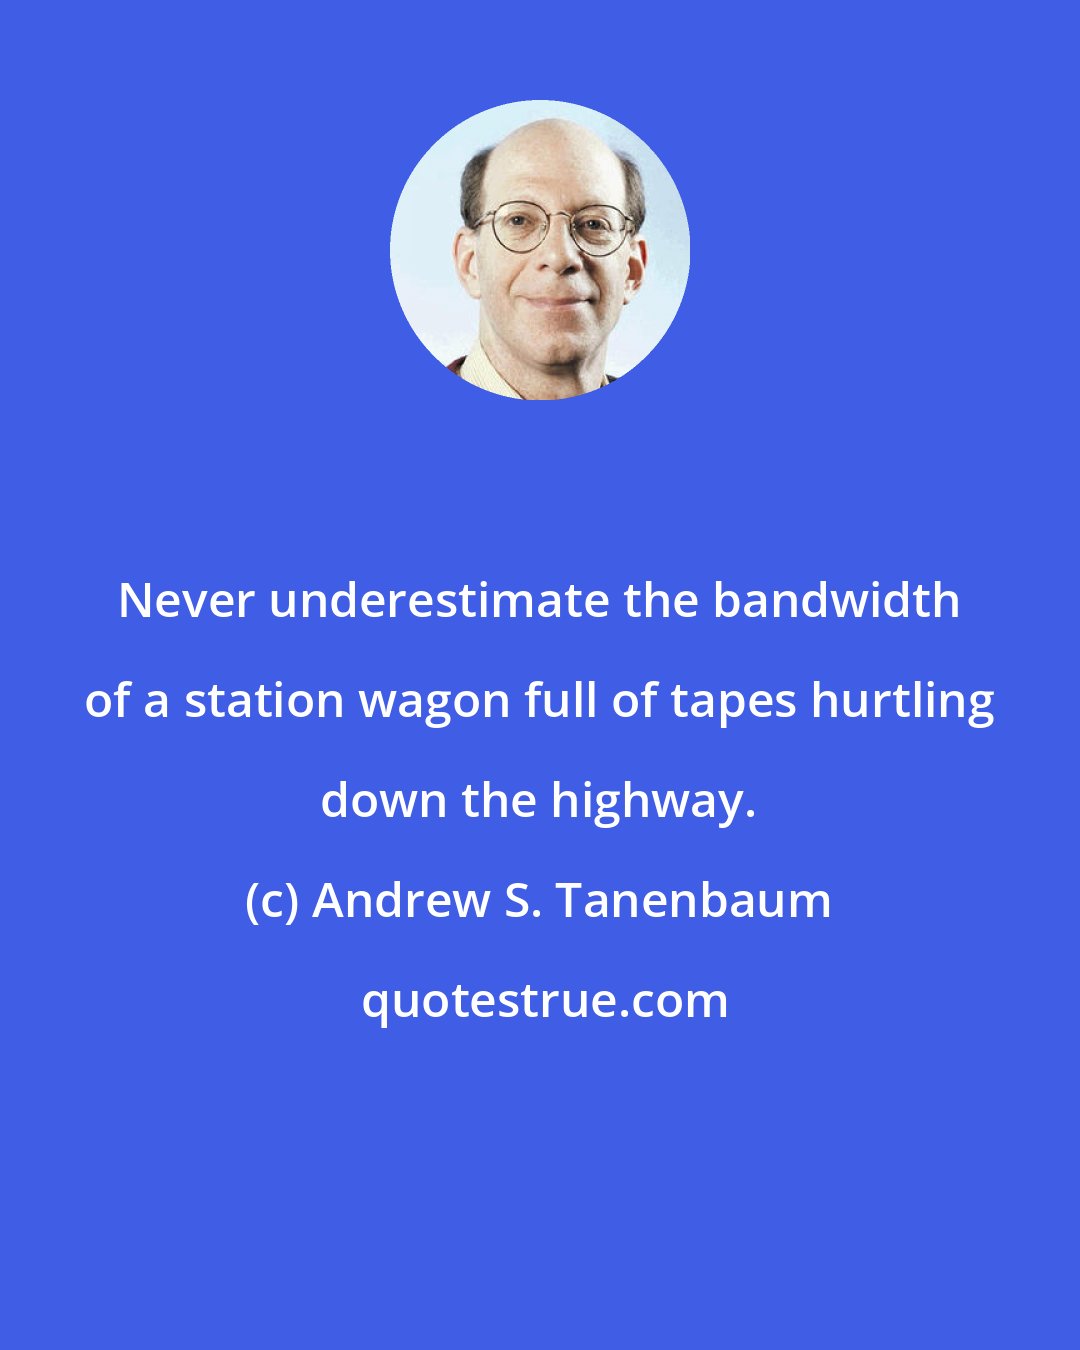 Andrew S. Tanenbaum: Never underestimate the bandwidth of a station wagon full of tapes hurtling down the highway.